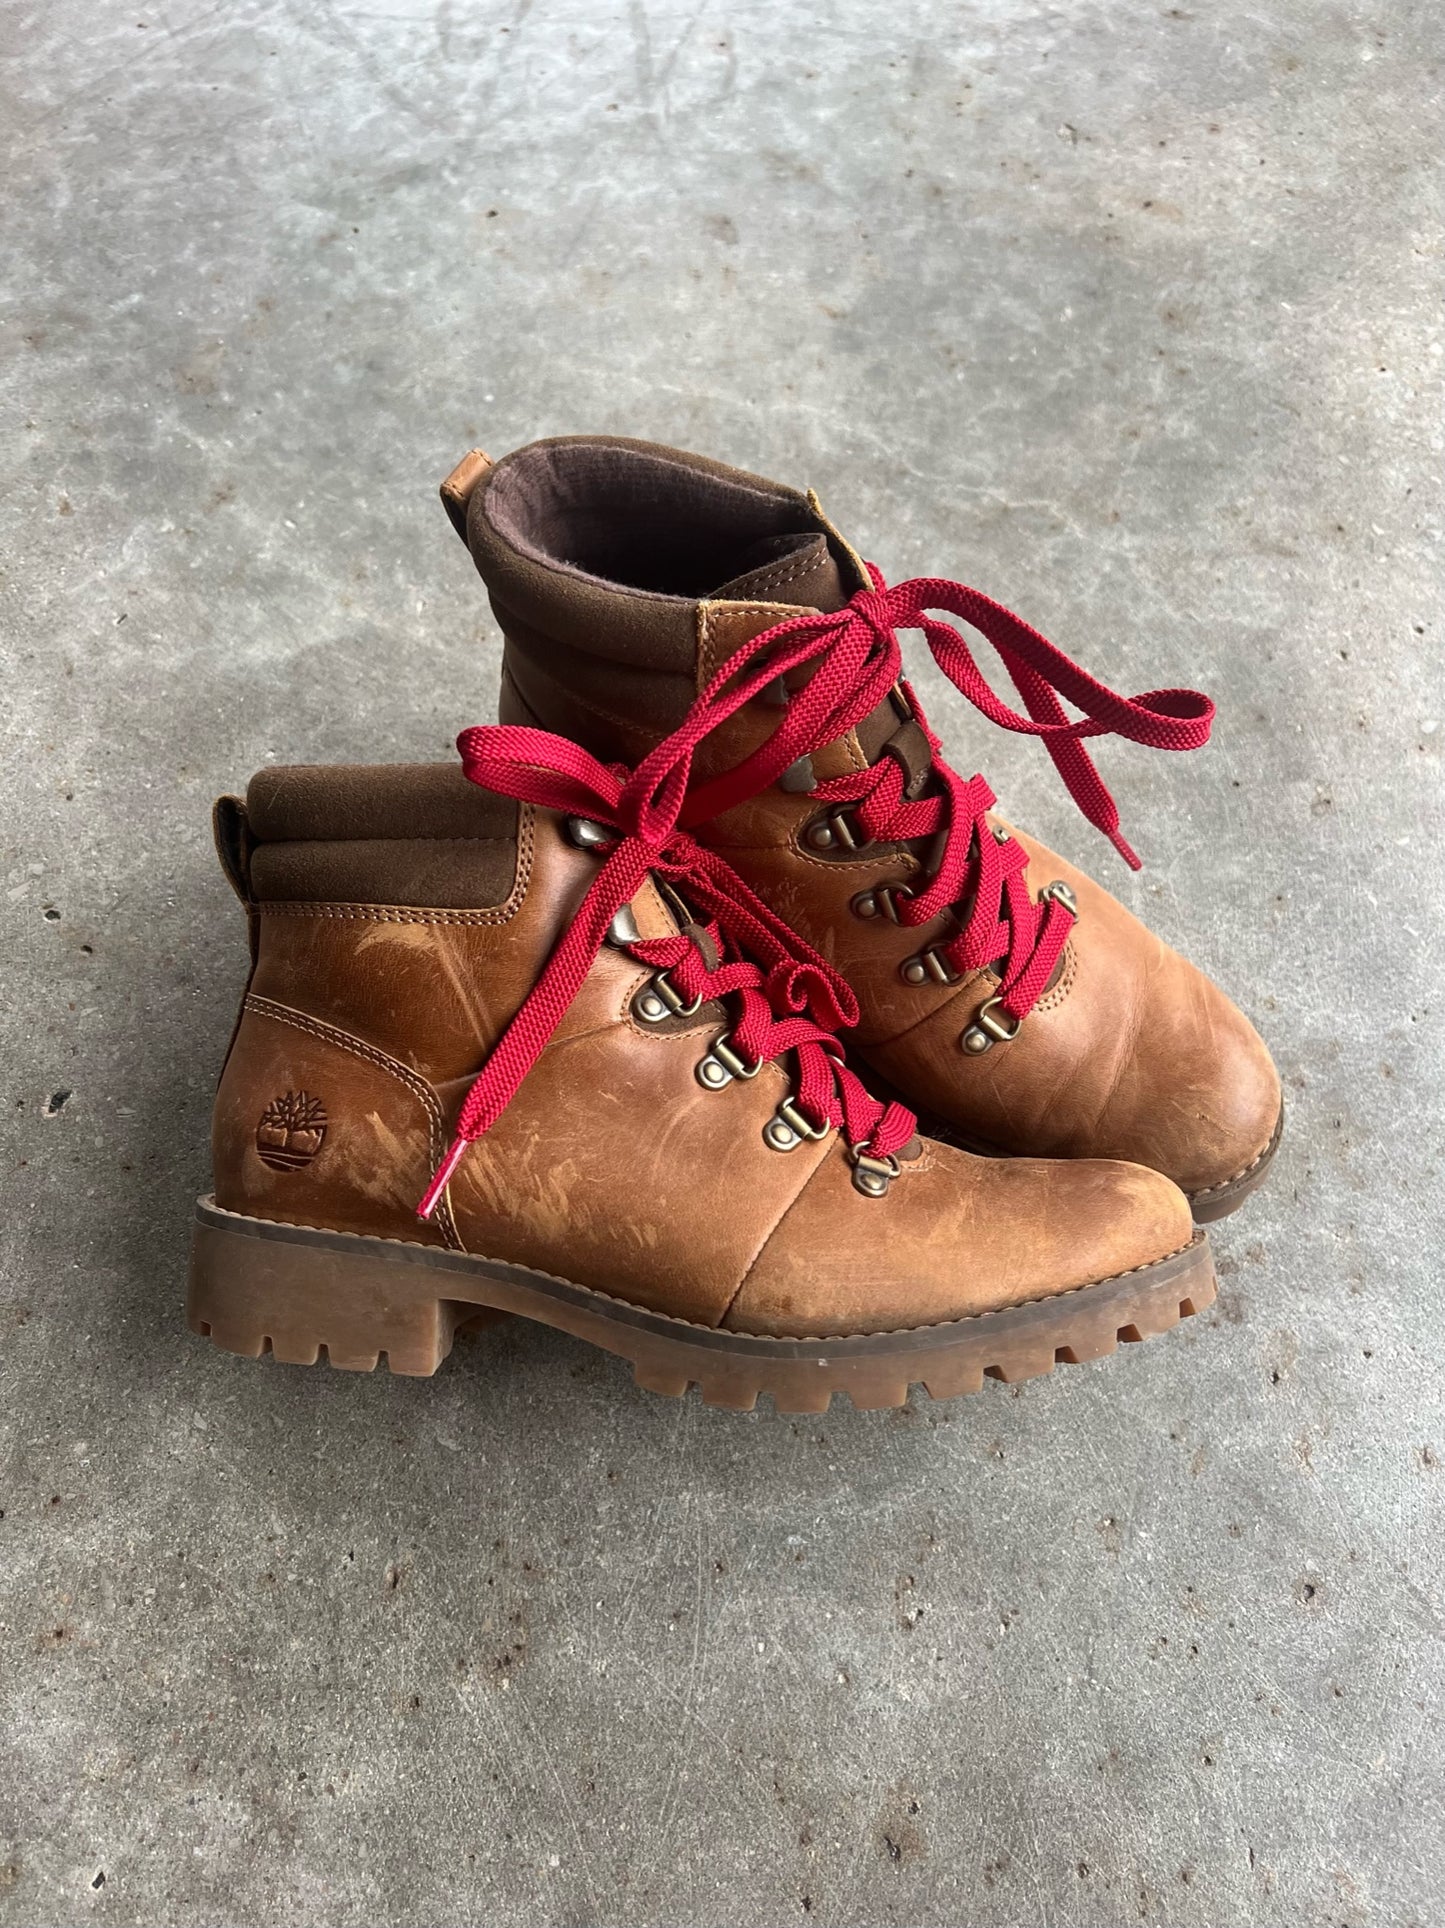 Vintage Timberland Hiking Boots - 6.5